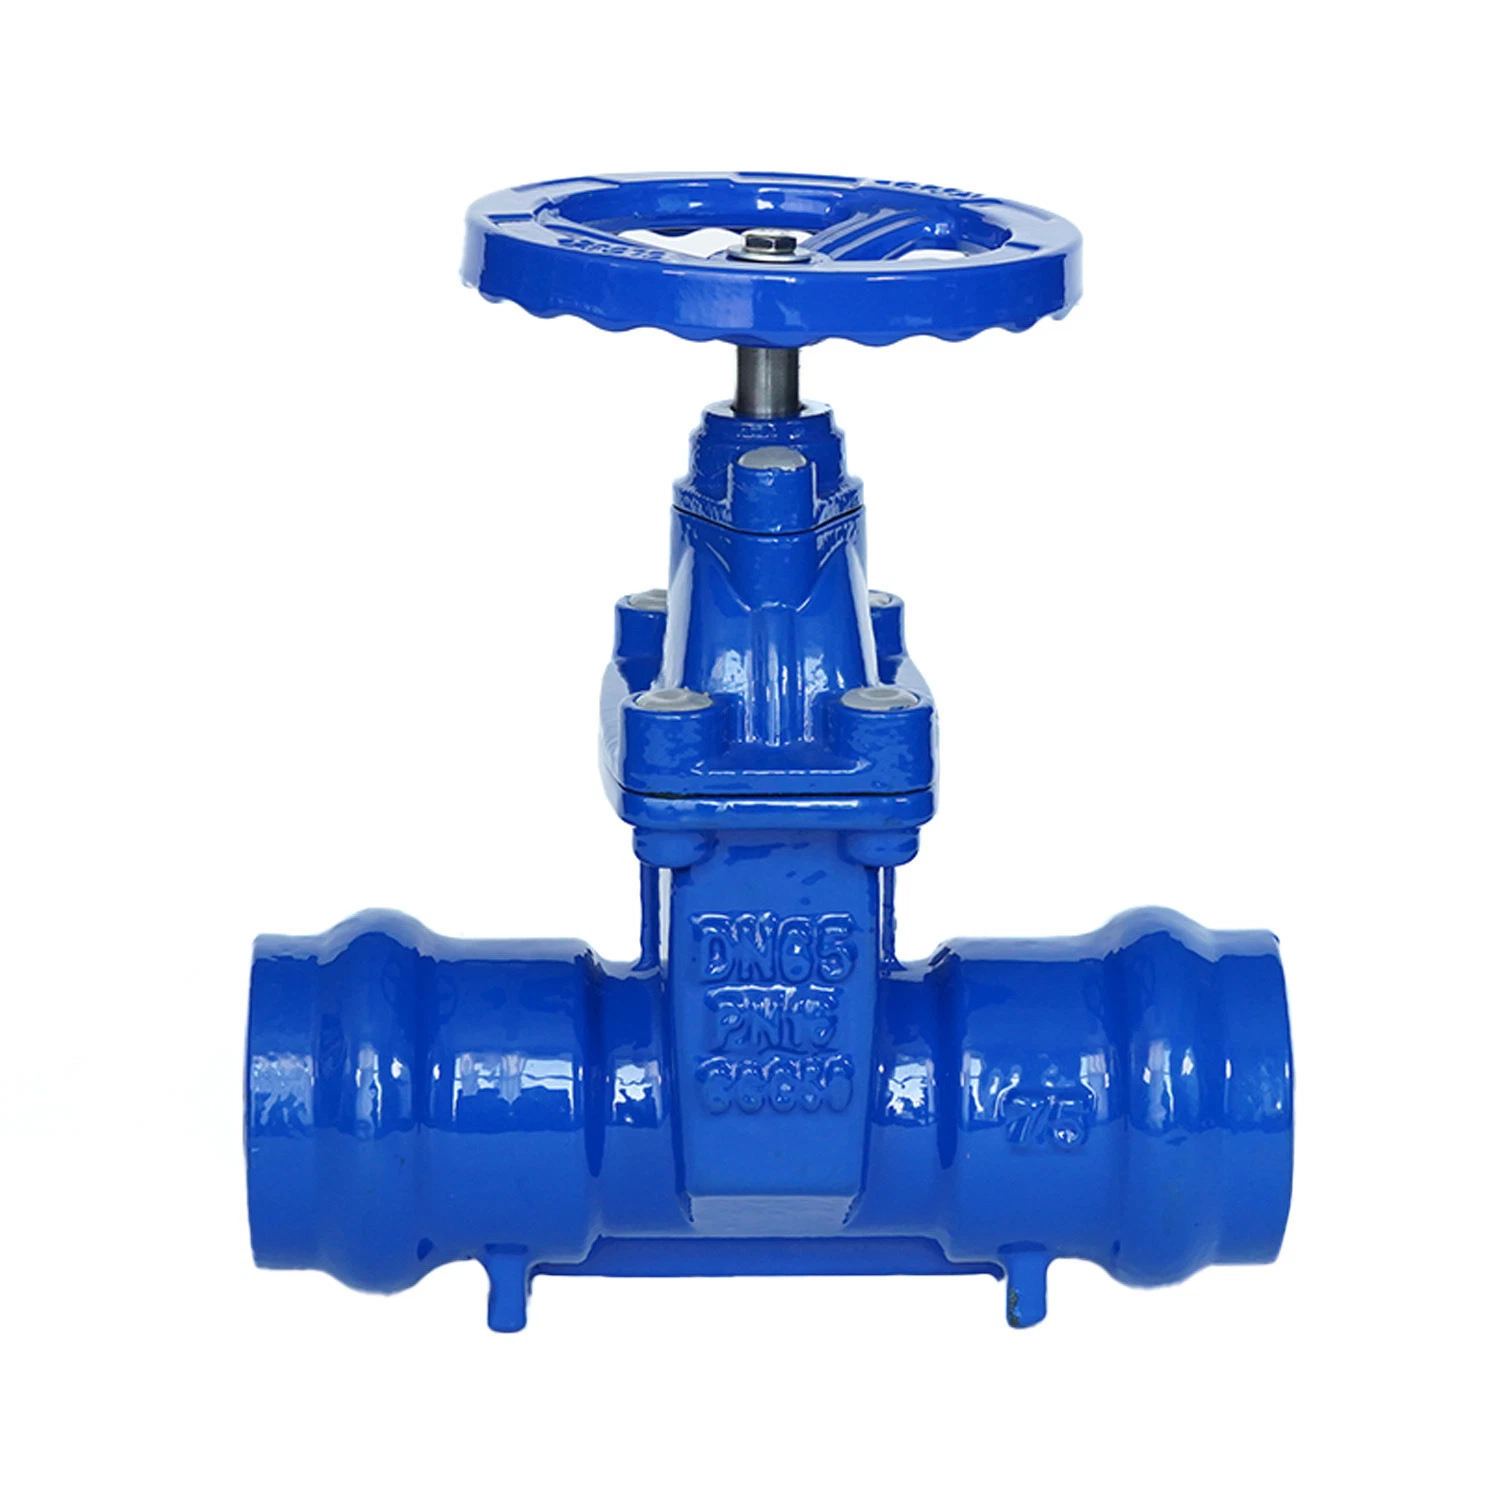 Customized DIN 3352 F4 Ductile Iron Socket End Resilient Seat Gate Valve for Pipe